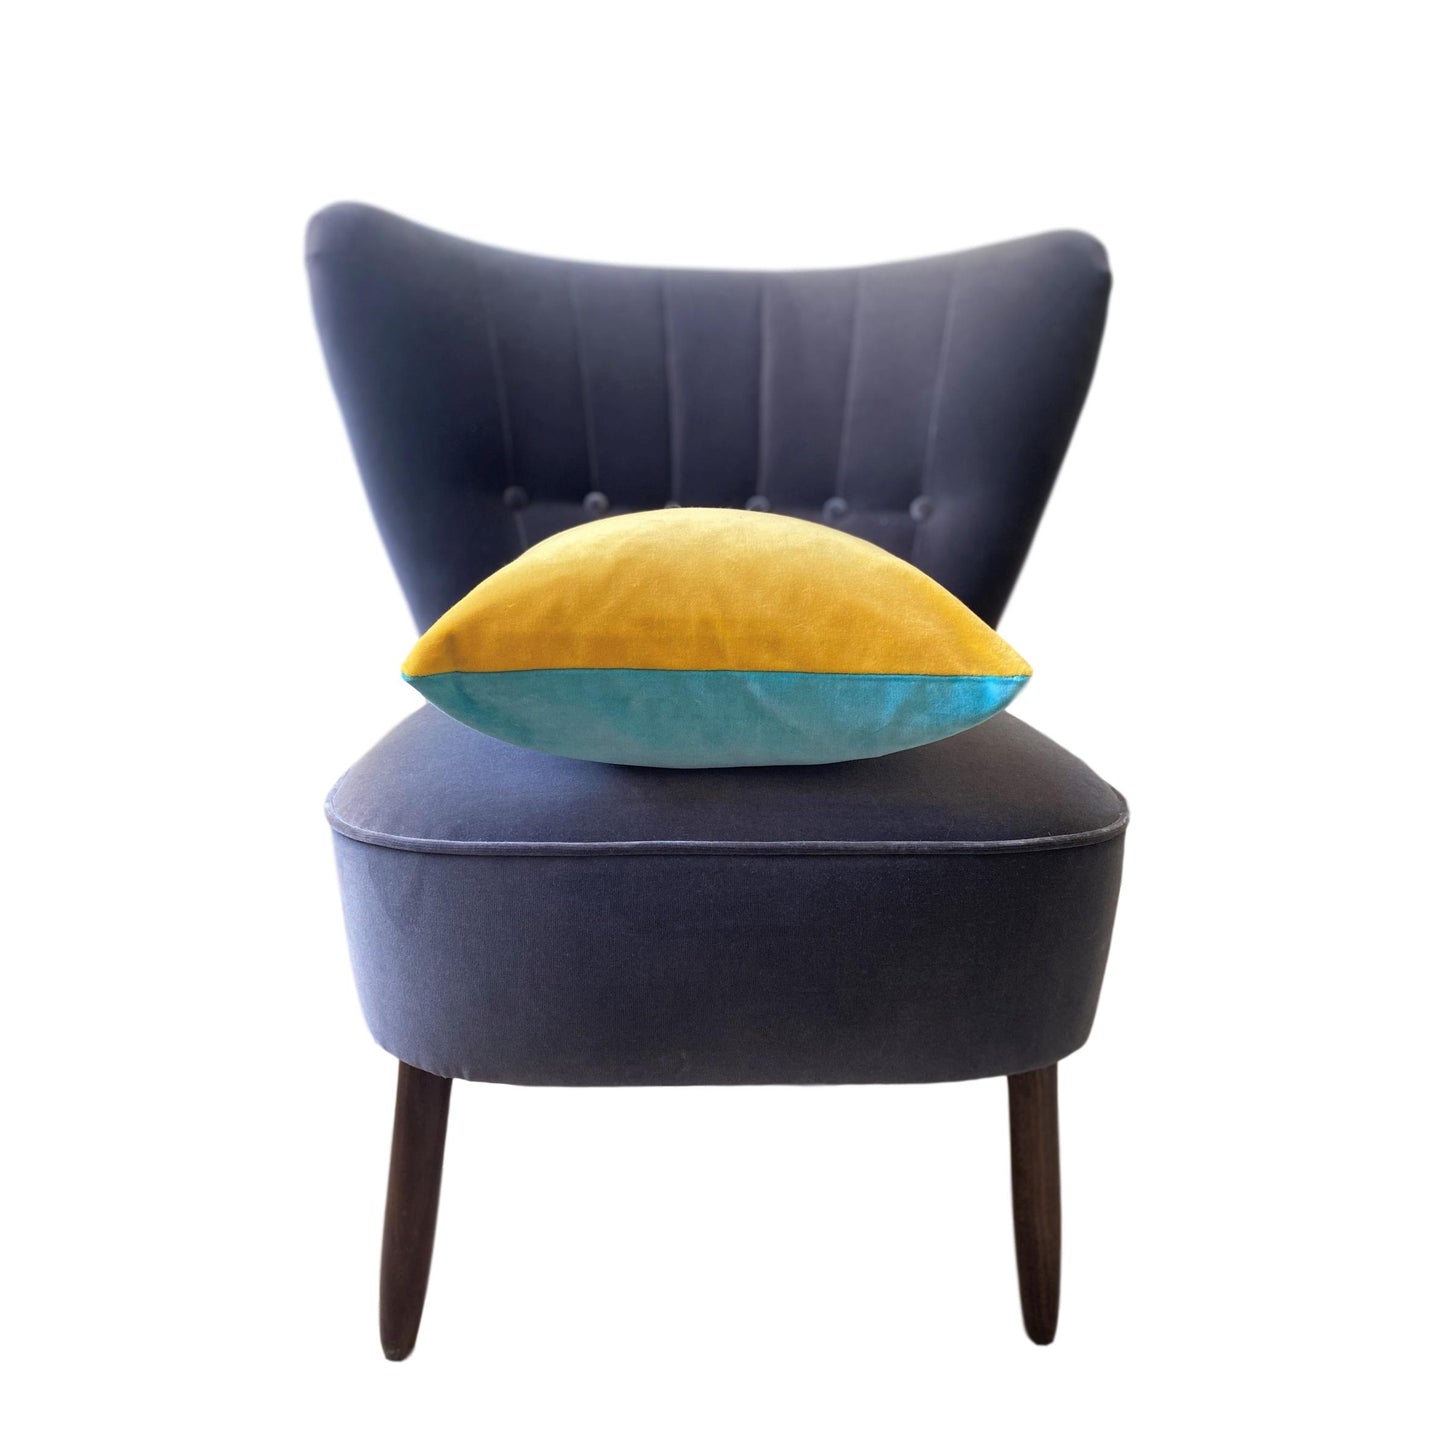 Turquoise Velvet Cushion Cover with Mustard Yellow